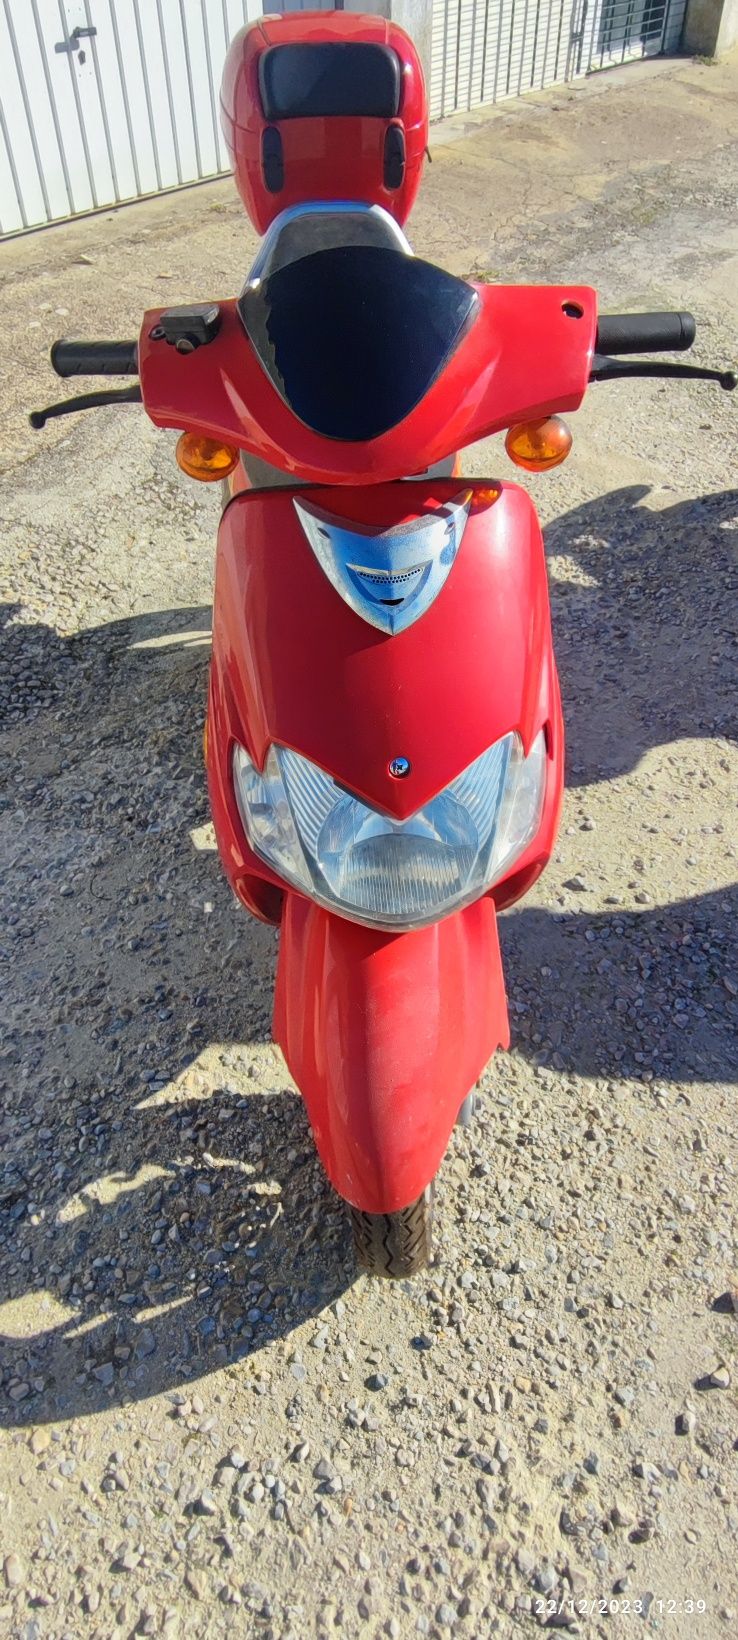 Scooter 50 CC chinesa